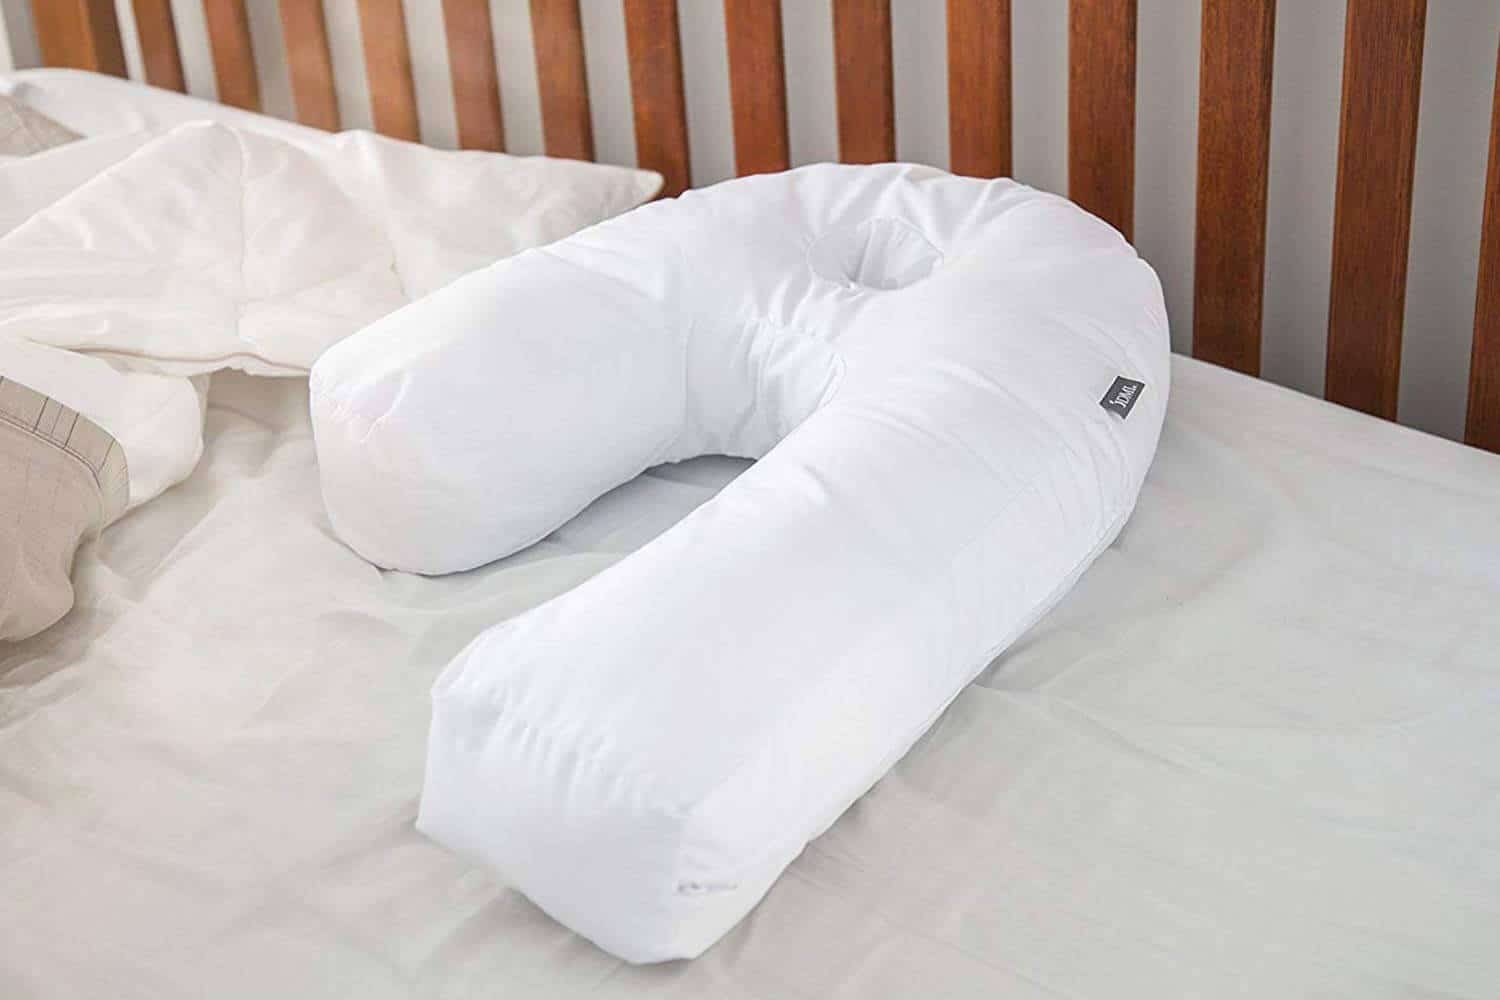 Duro-Med DMI Side Sleeper Body Pillow with Contoured Support to Help Eliminate Neck & Back Pain, Includes Hypoallergenic Removable Washable Cover, Firm